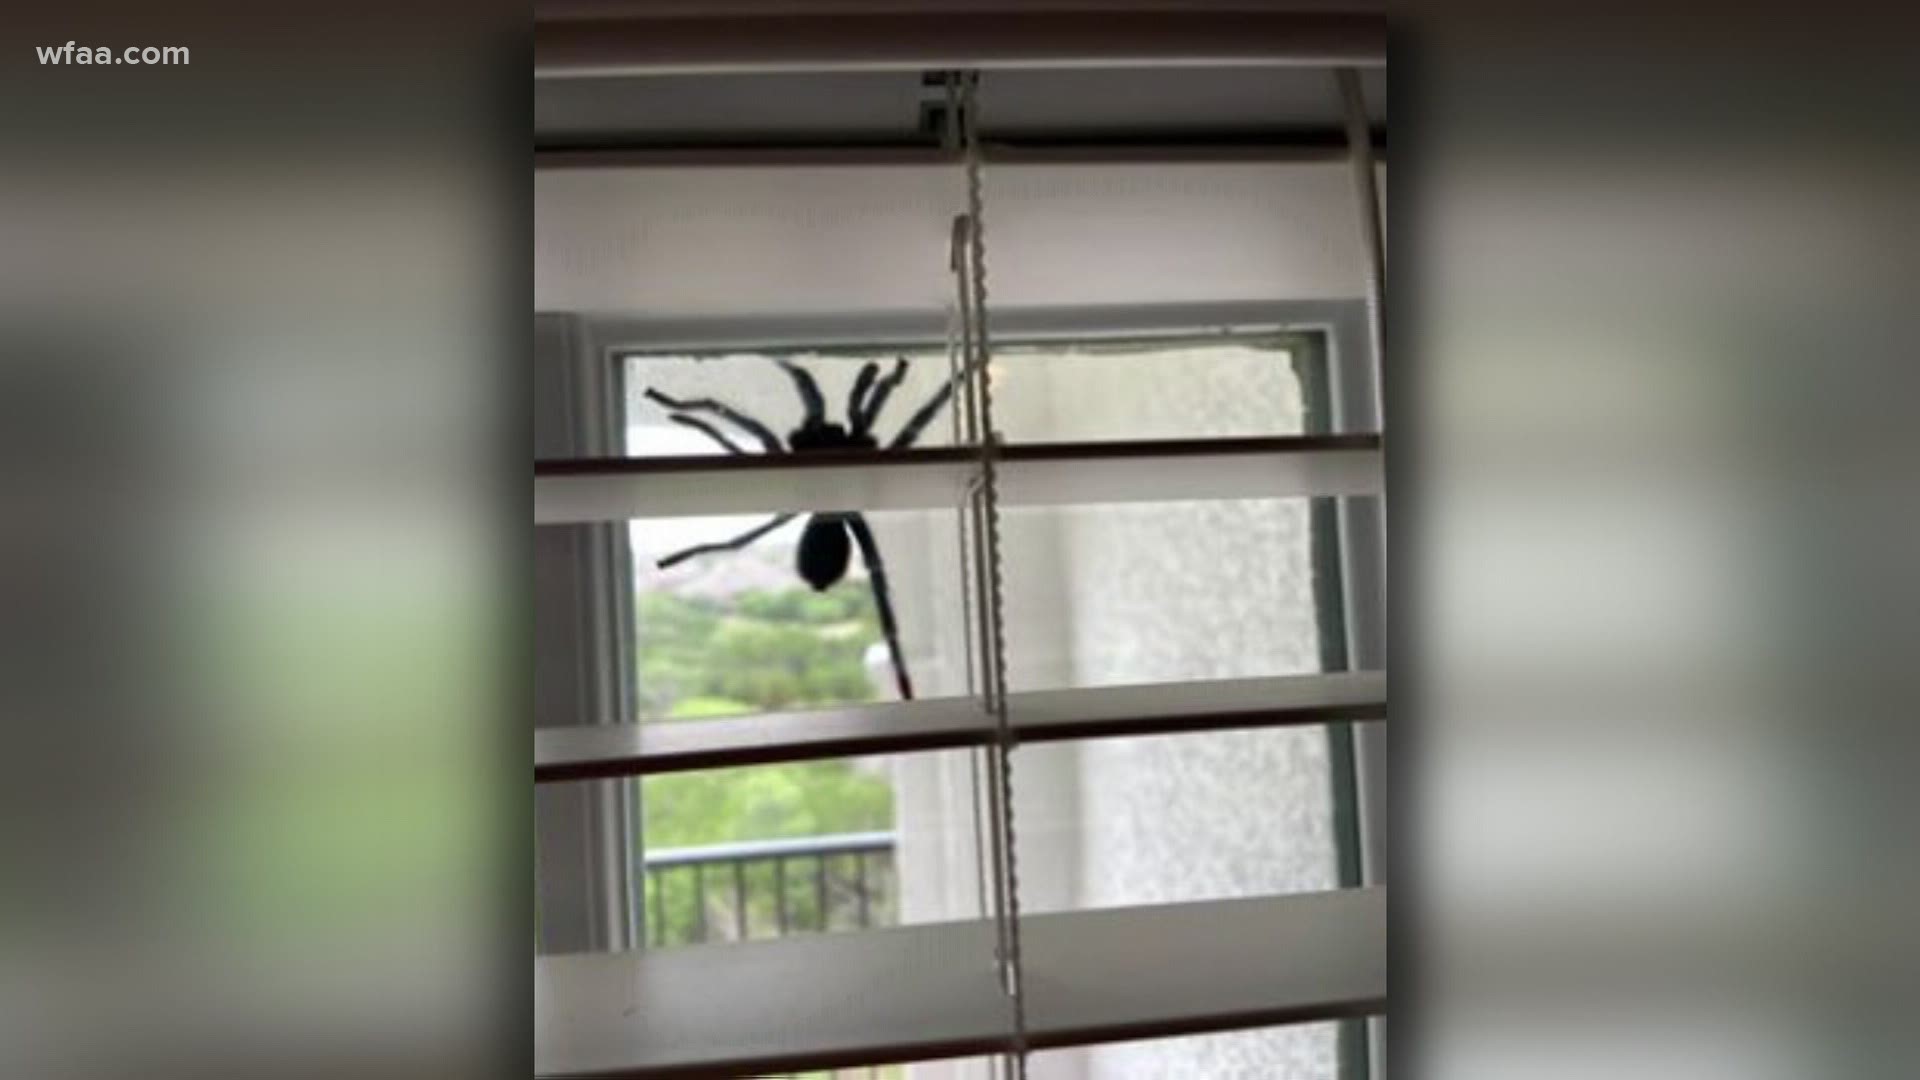 A Texas woman found a huge spider at her new home. Experts say it's likely a Texas Tan Tarantula which can grow up to 6 inches.